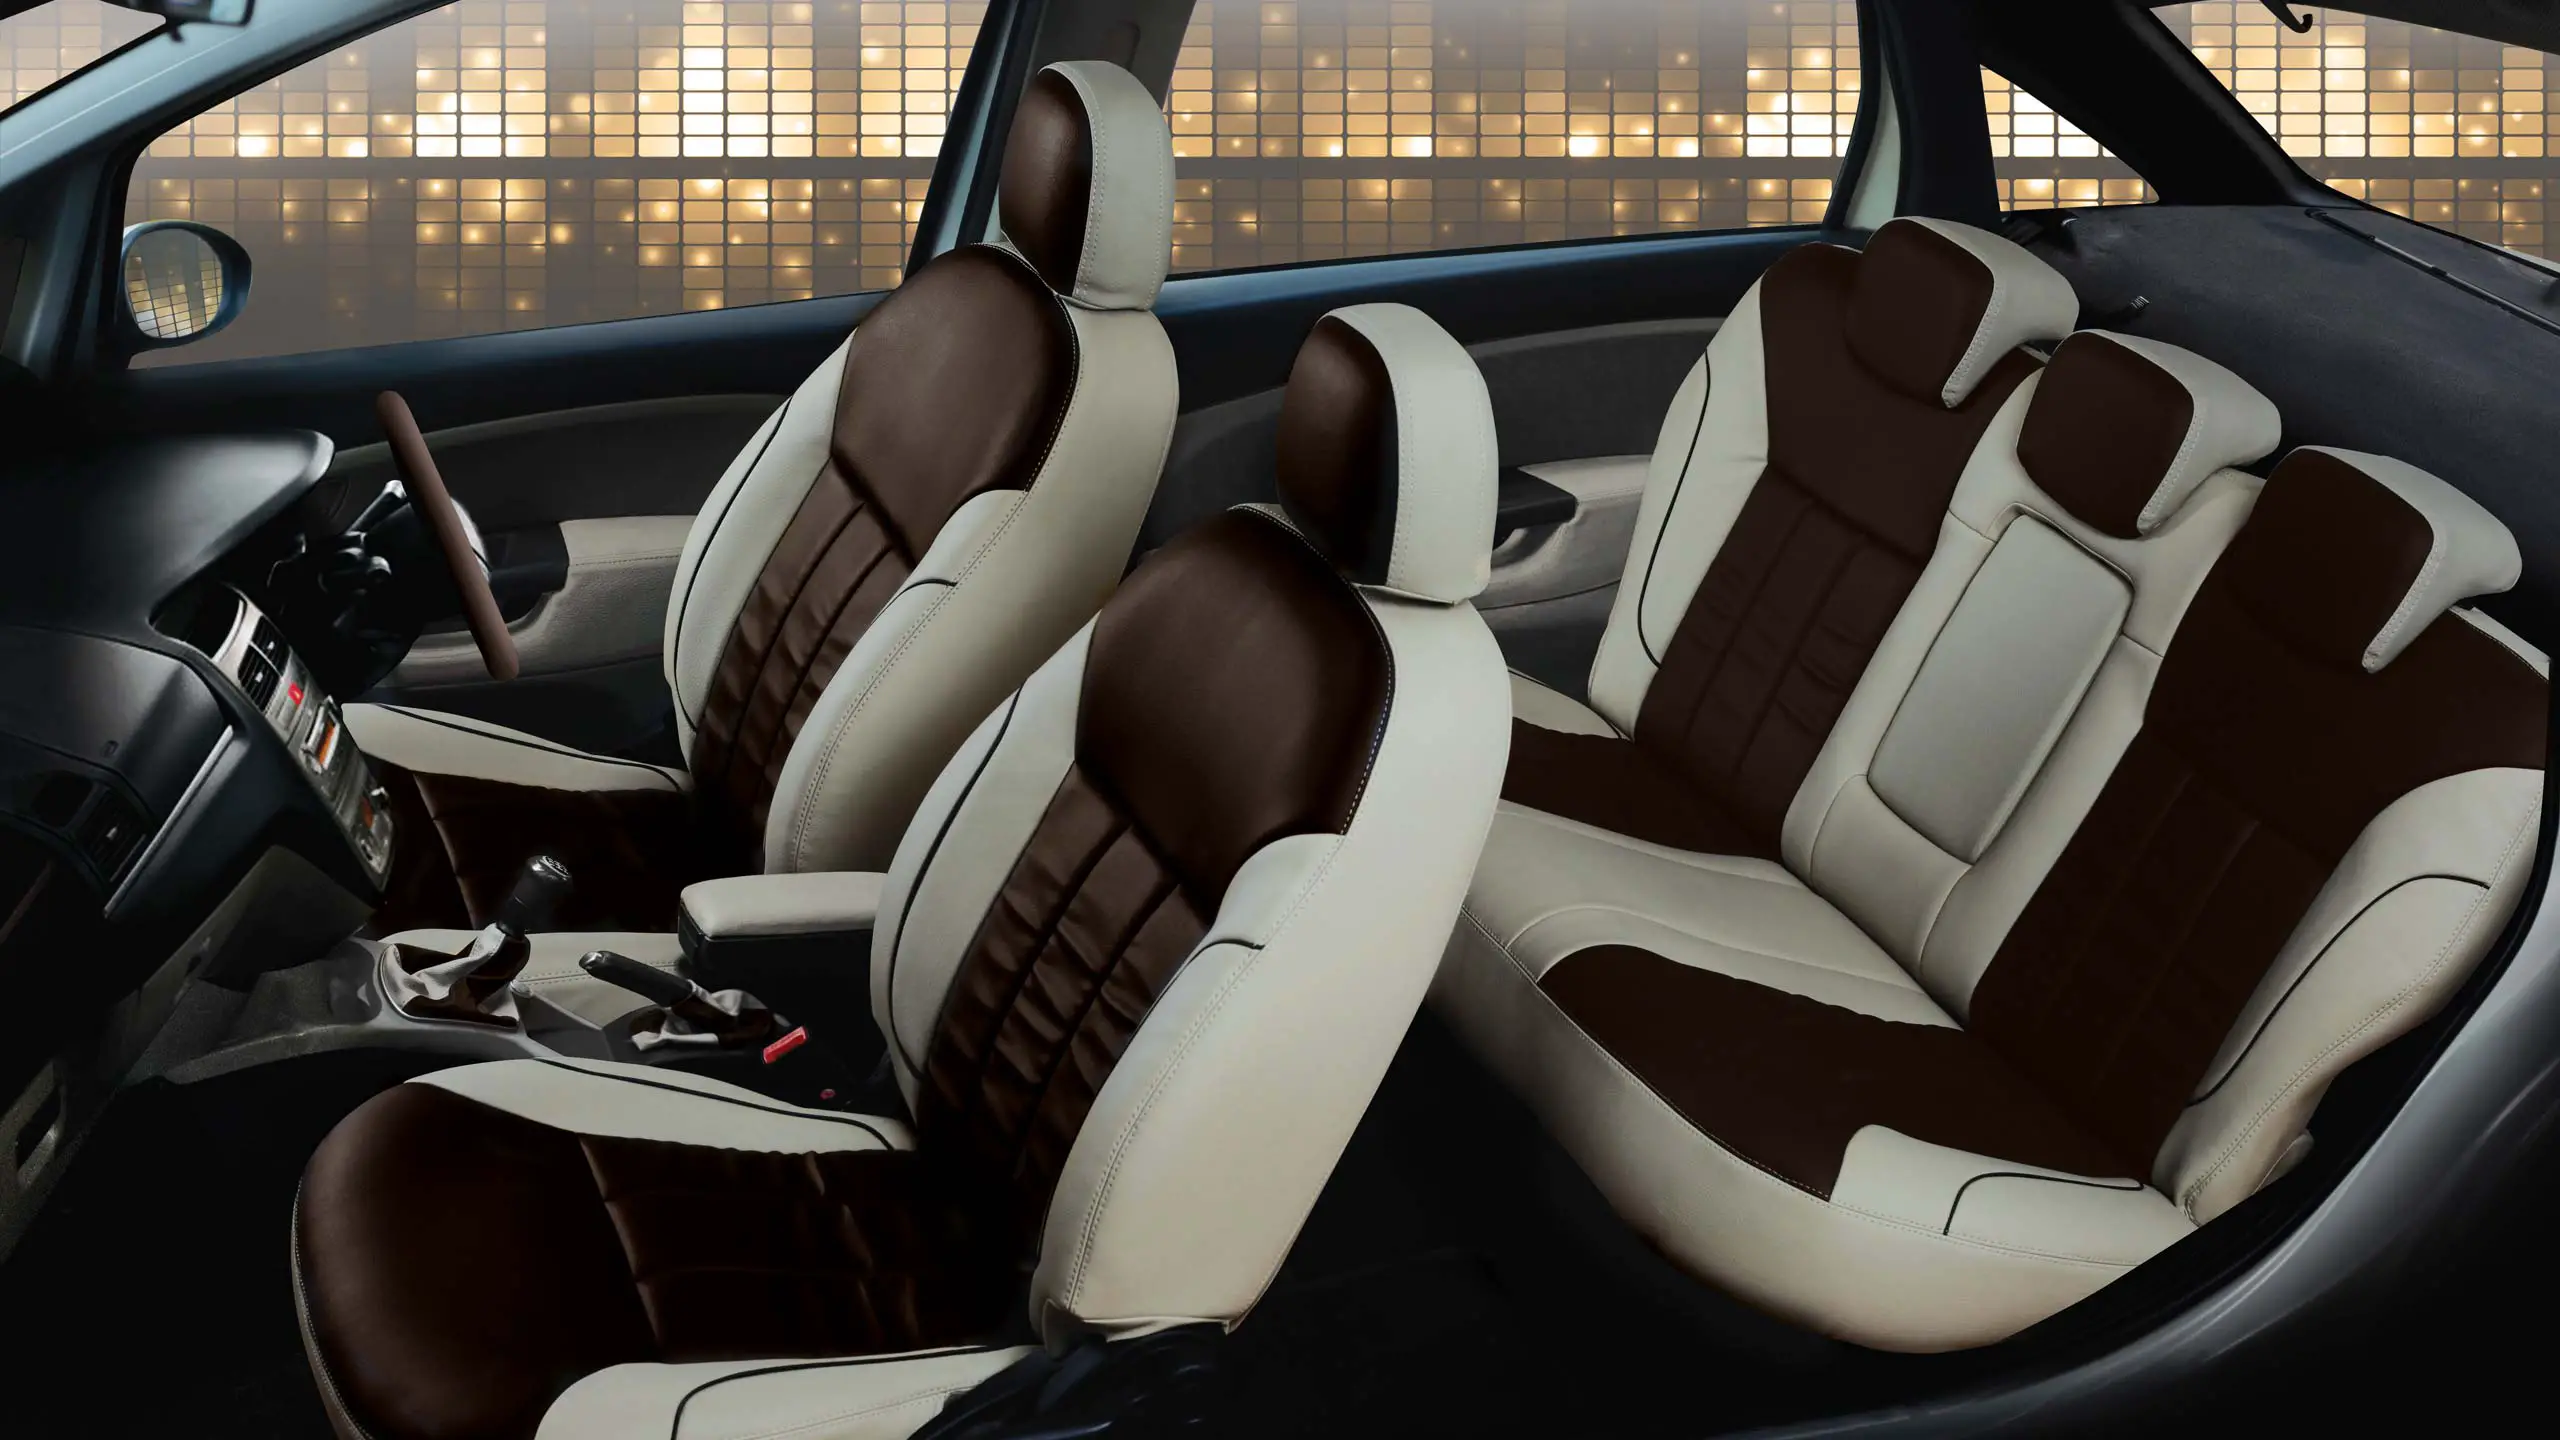 An in depth review of the best car seat covers in 2019